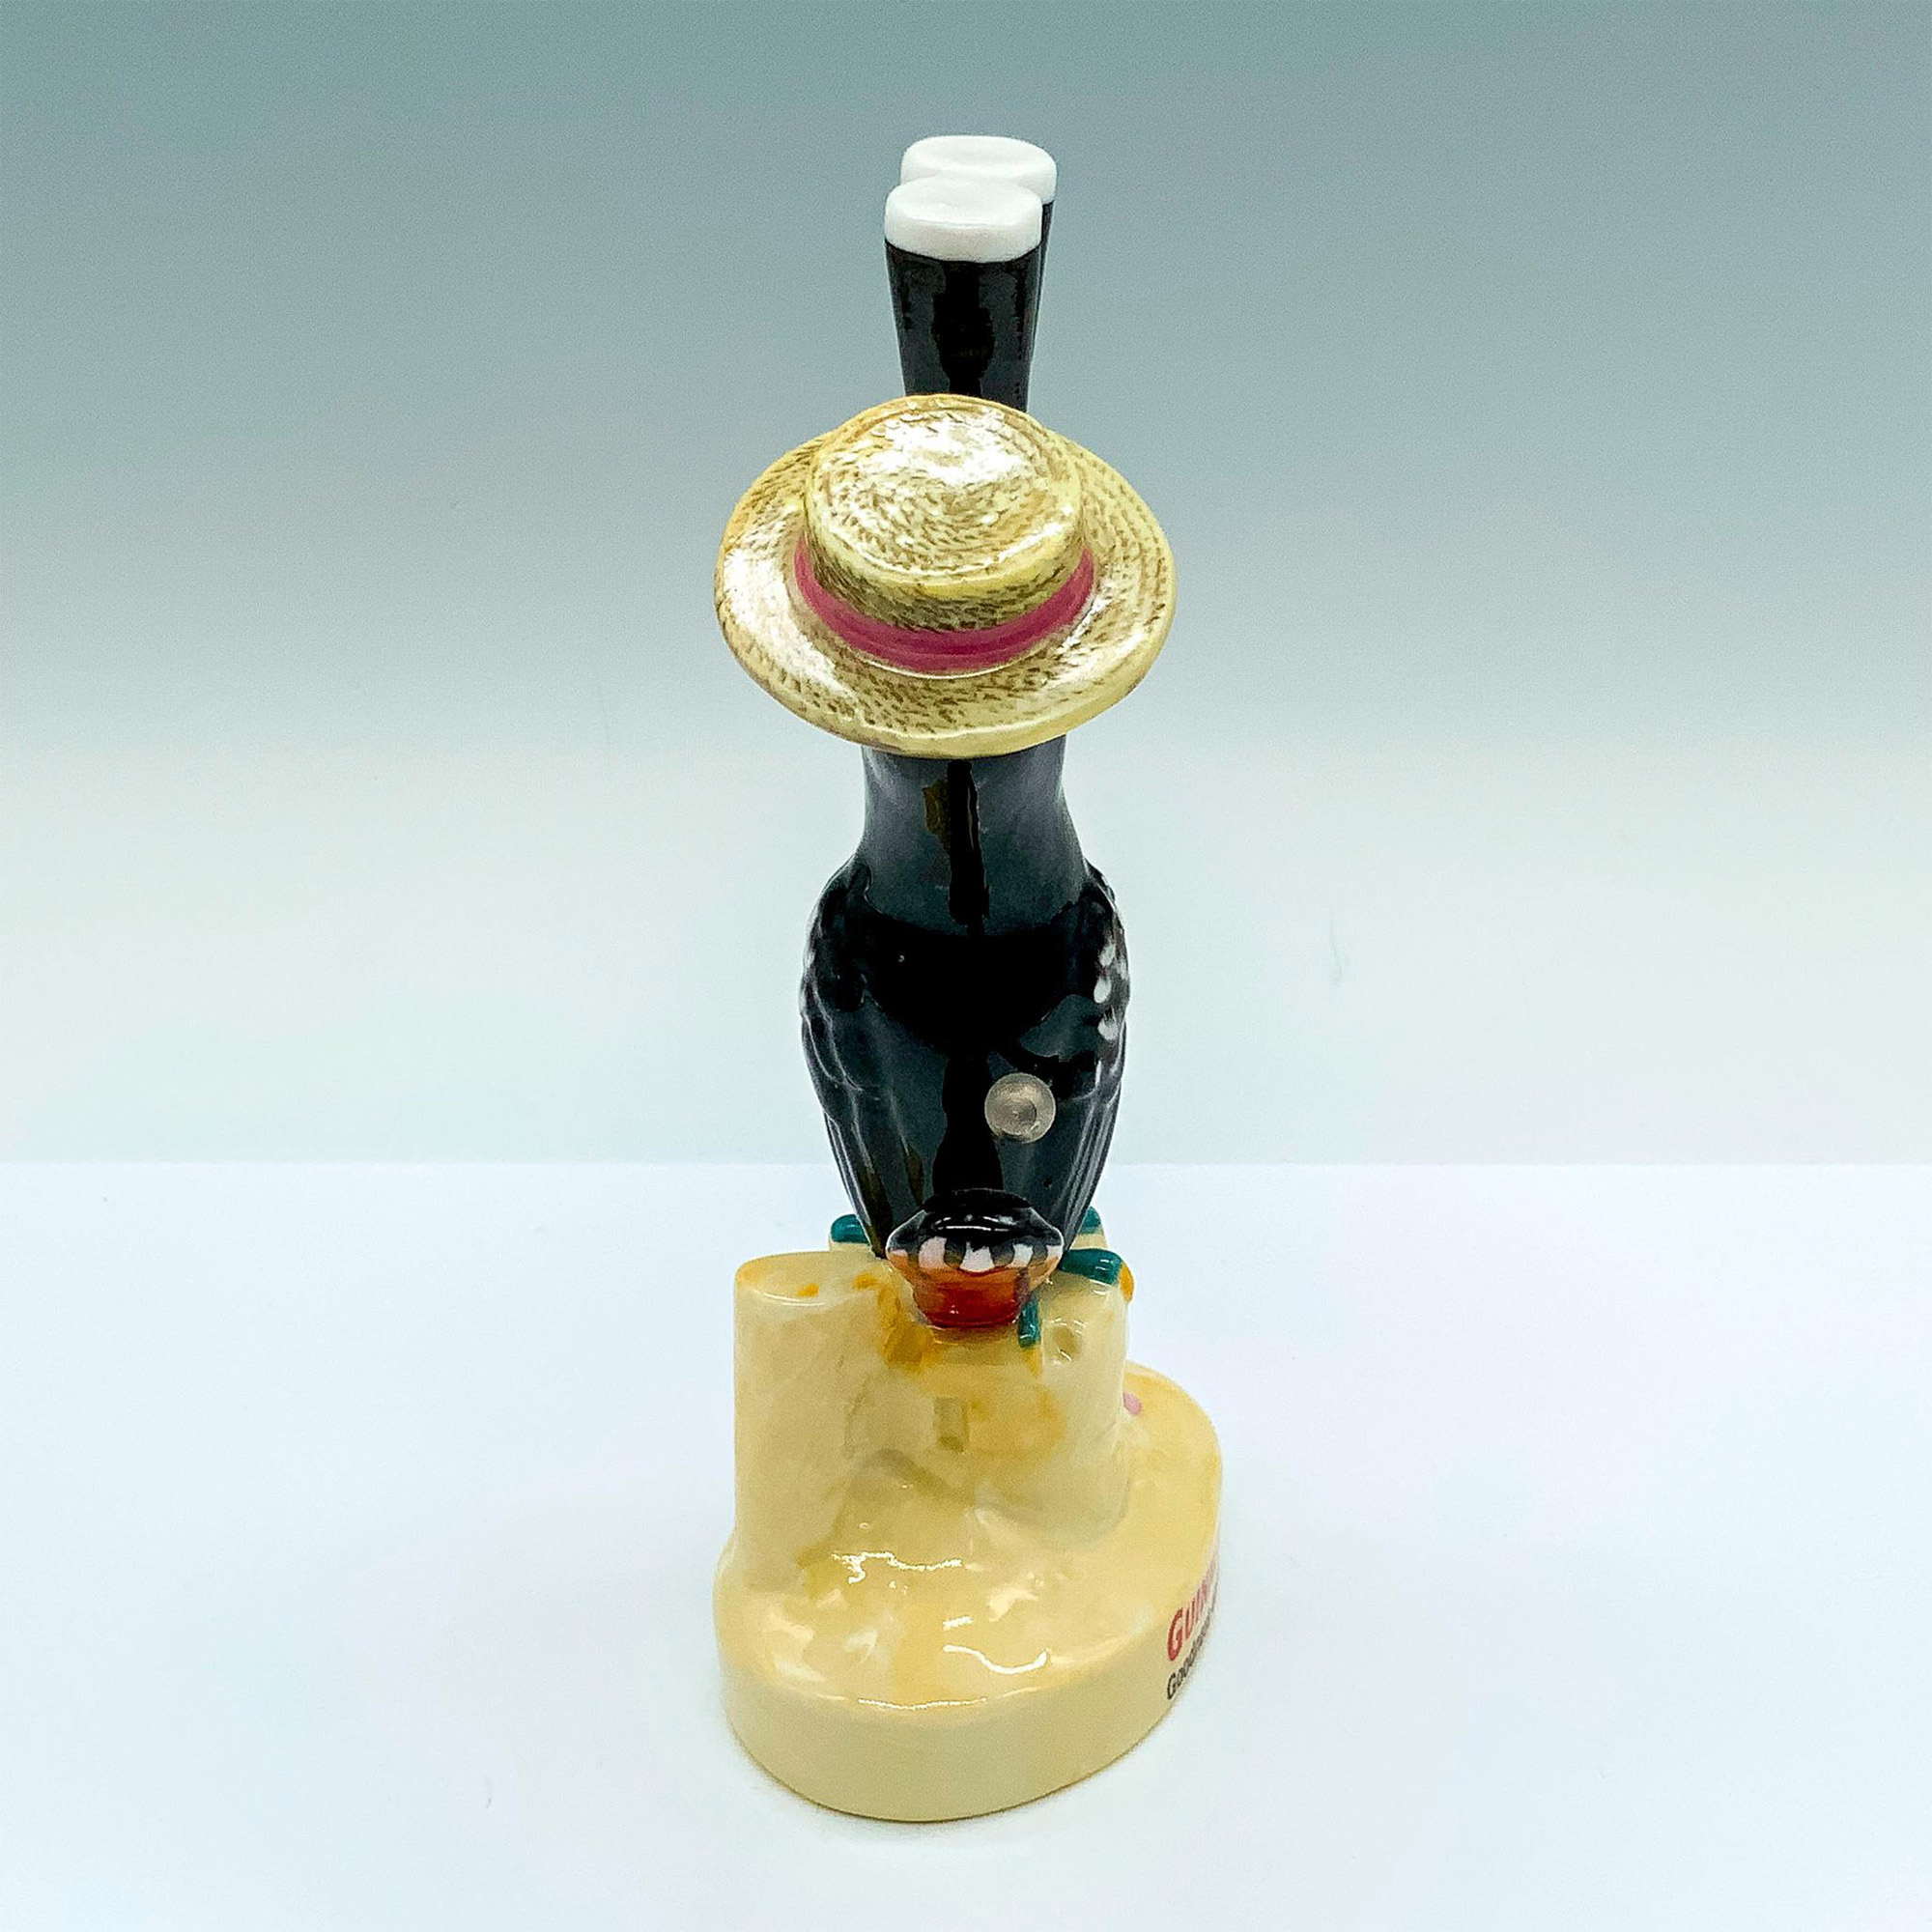 Royal Doulton Figurine for Guinness, Seaside Toucan MCL7 - Image 3 of 4